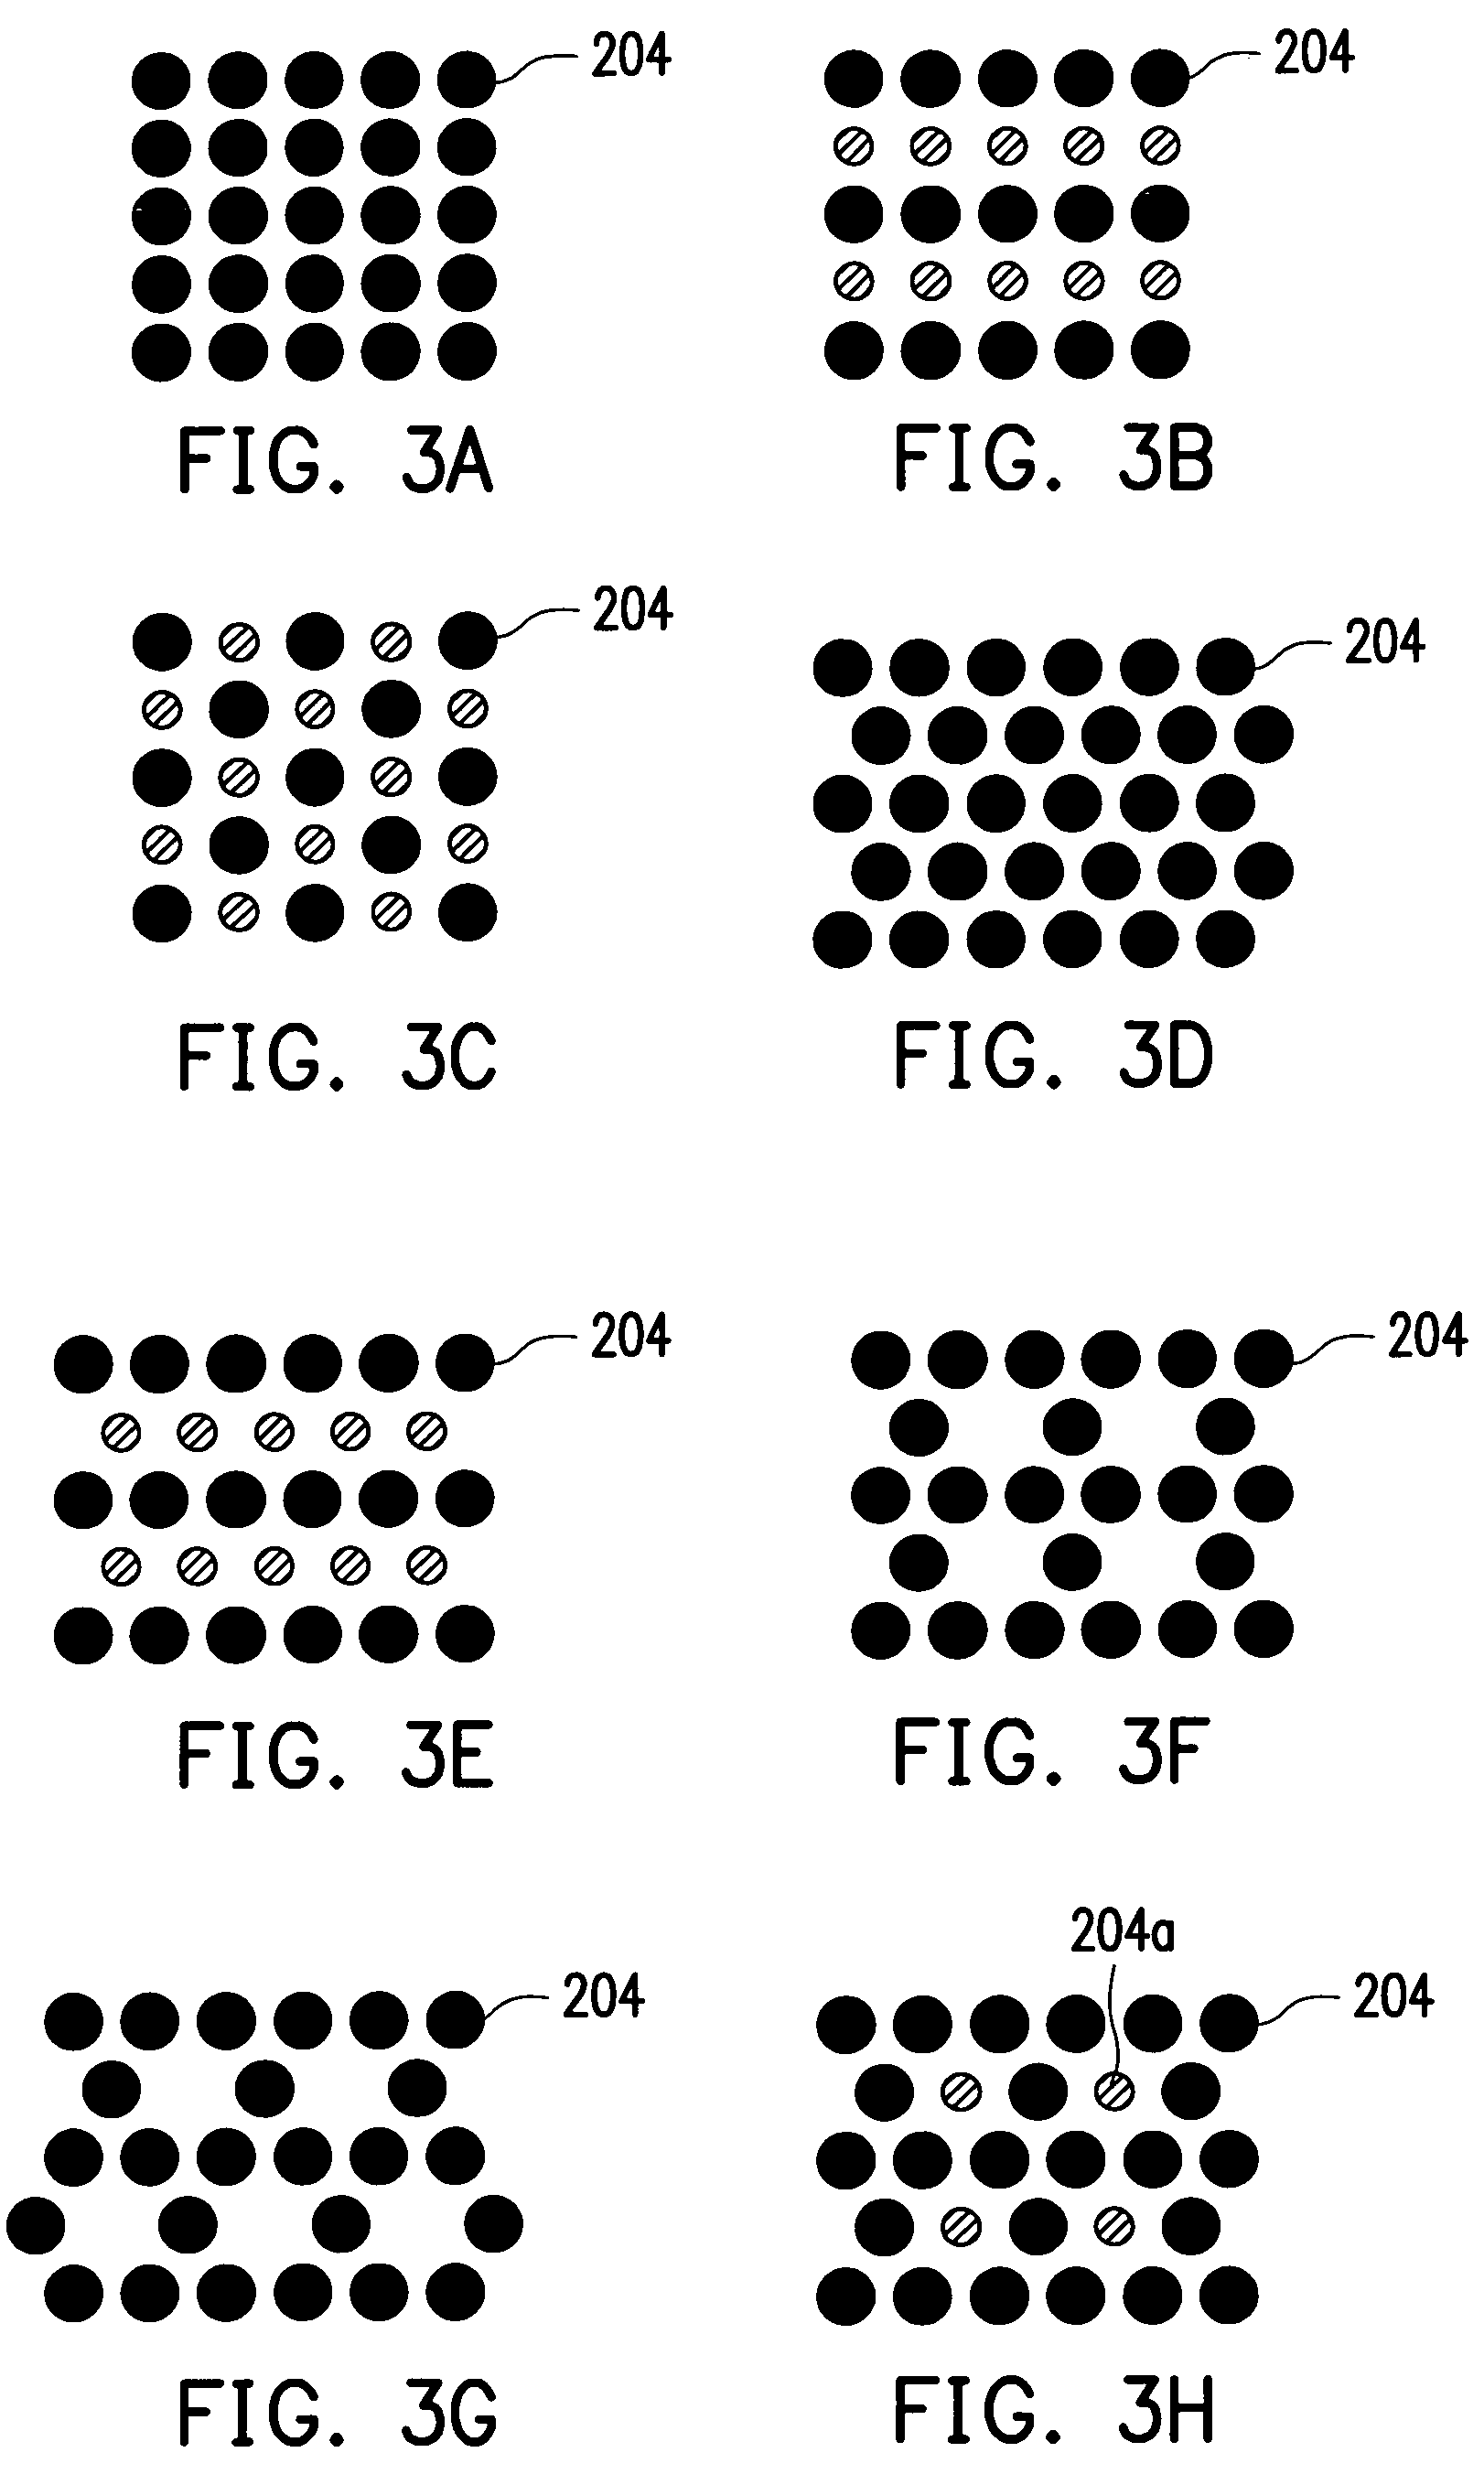 Light emitting diode structure having photonic crystals